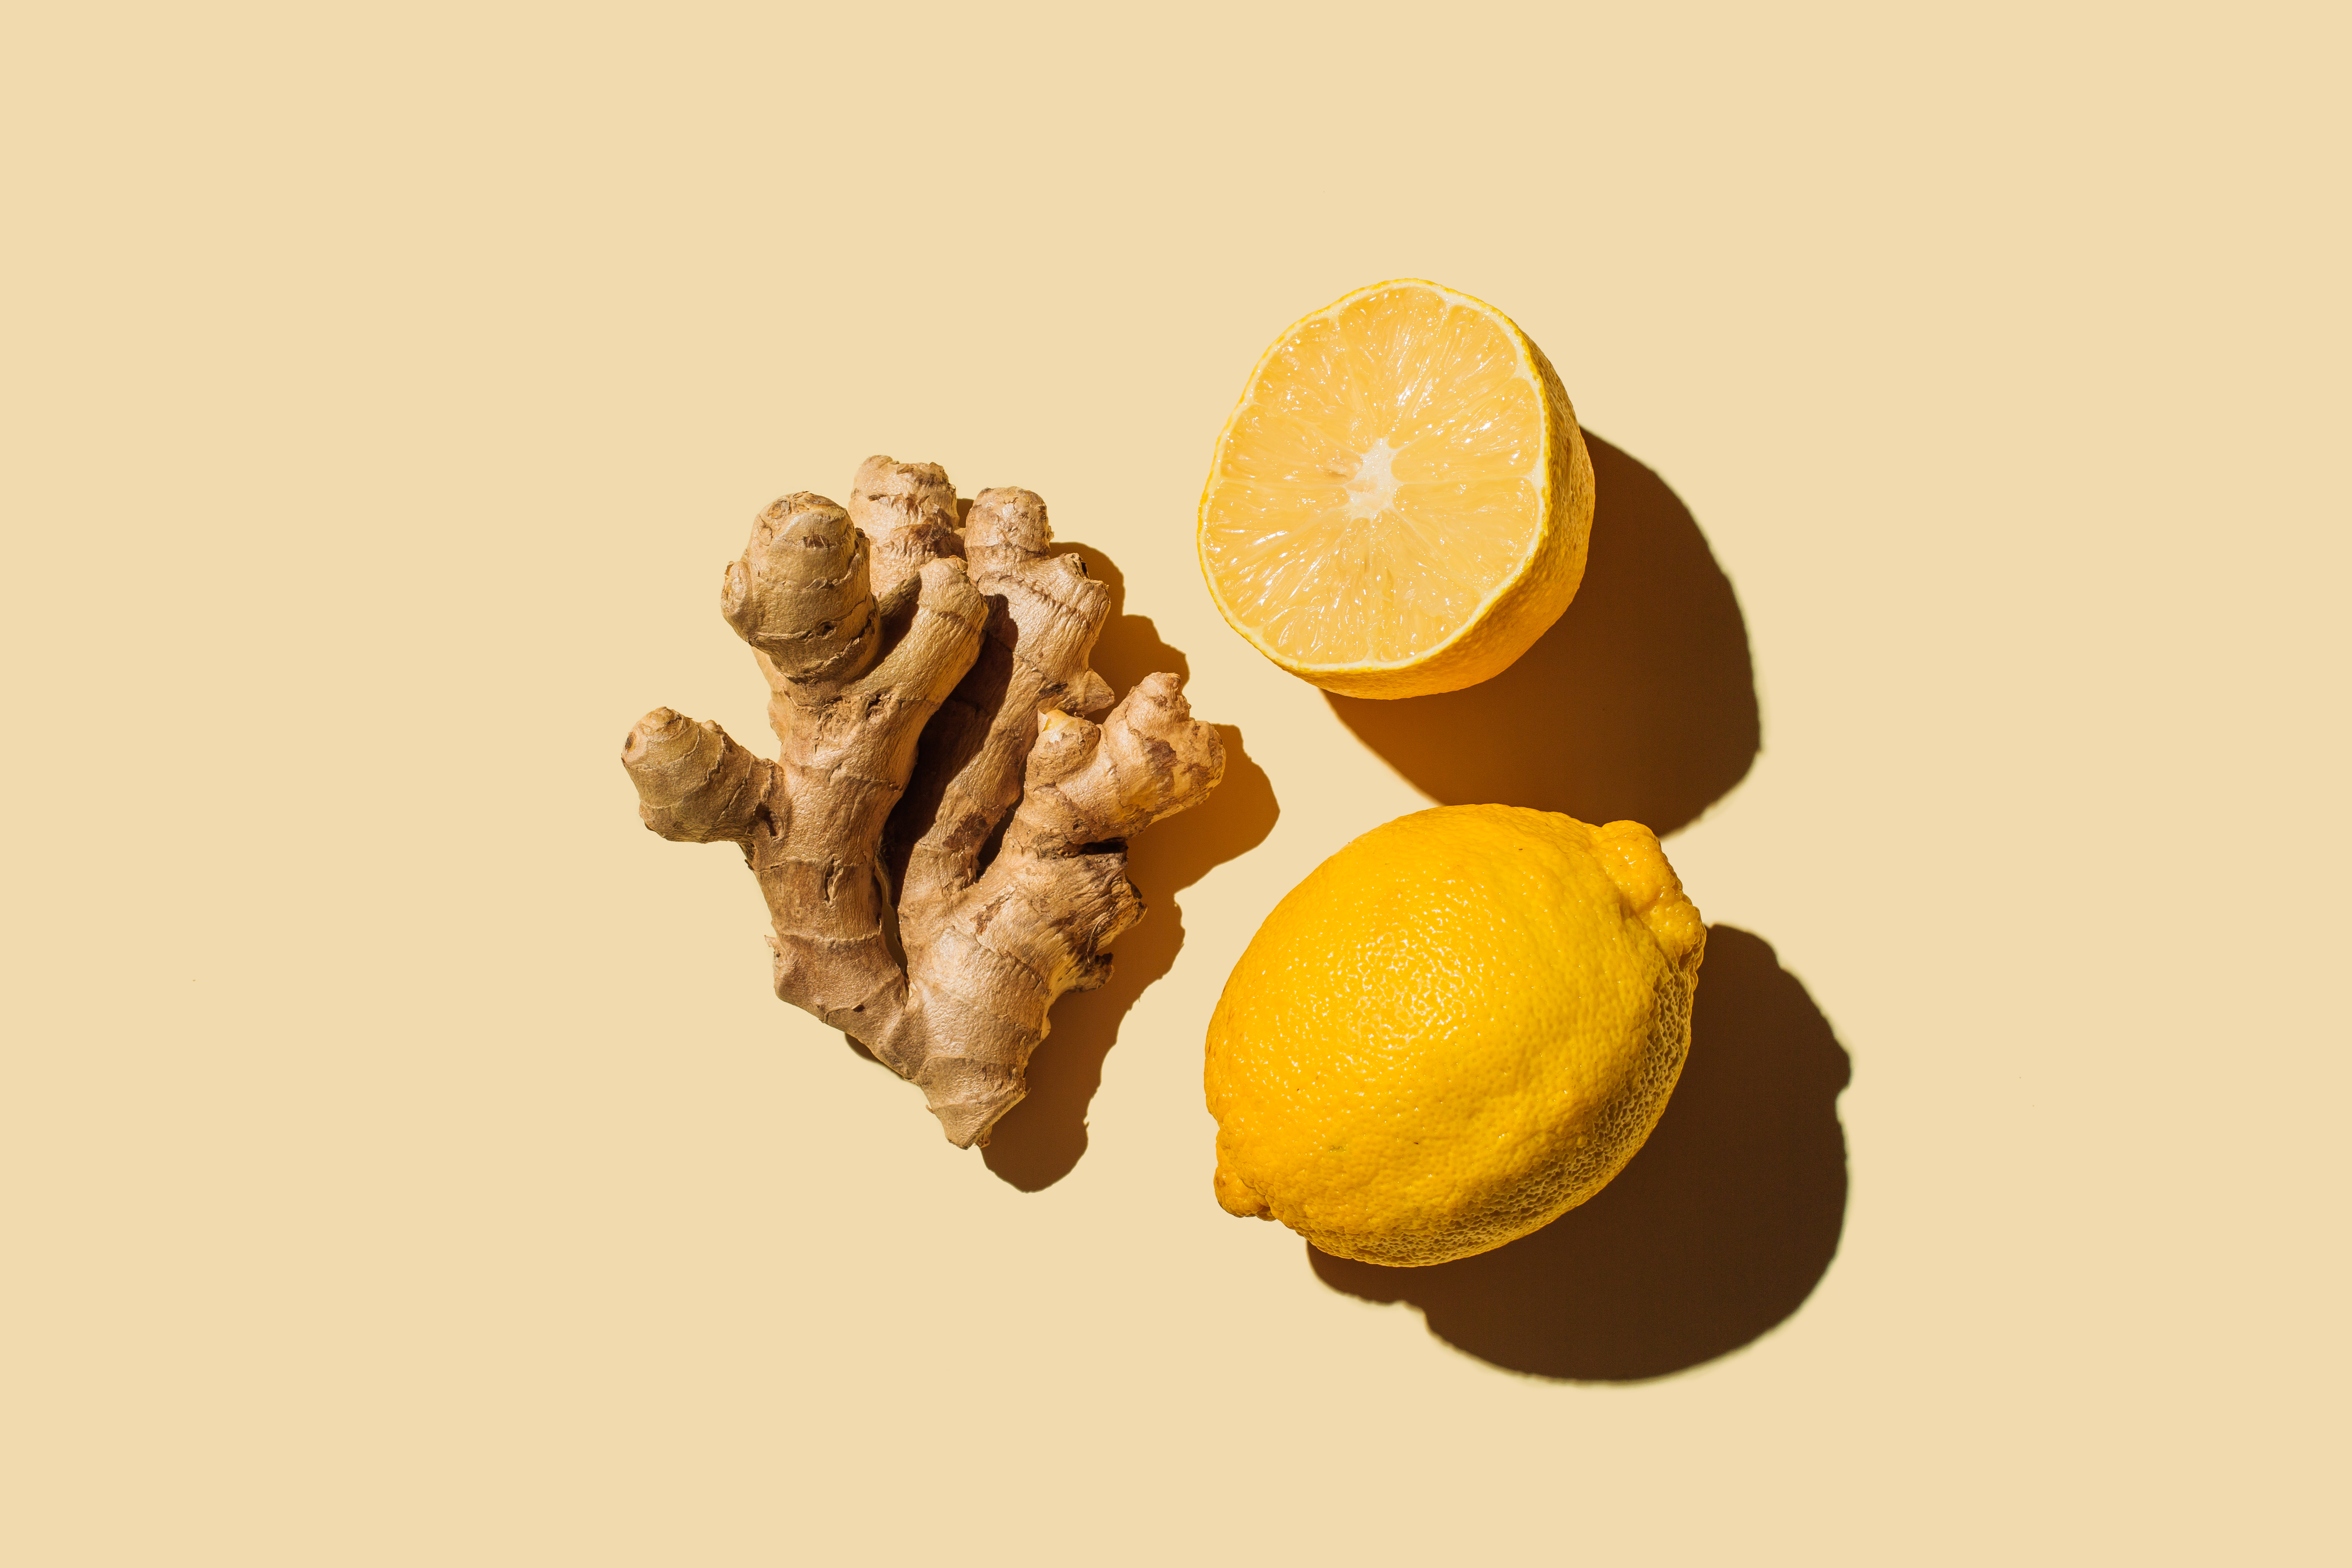 A photo of ginger root next to lemon slices, on a yellow background.